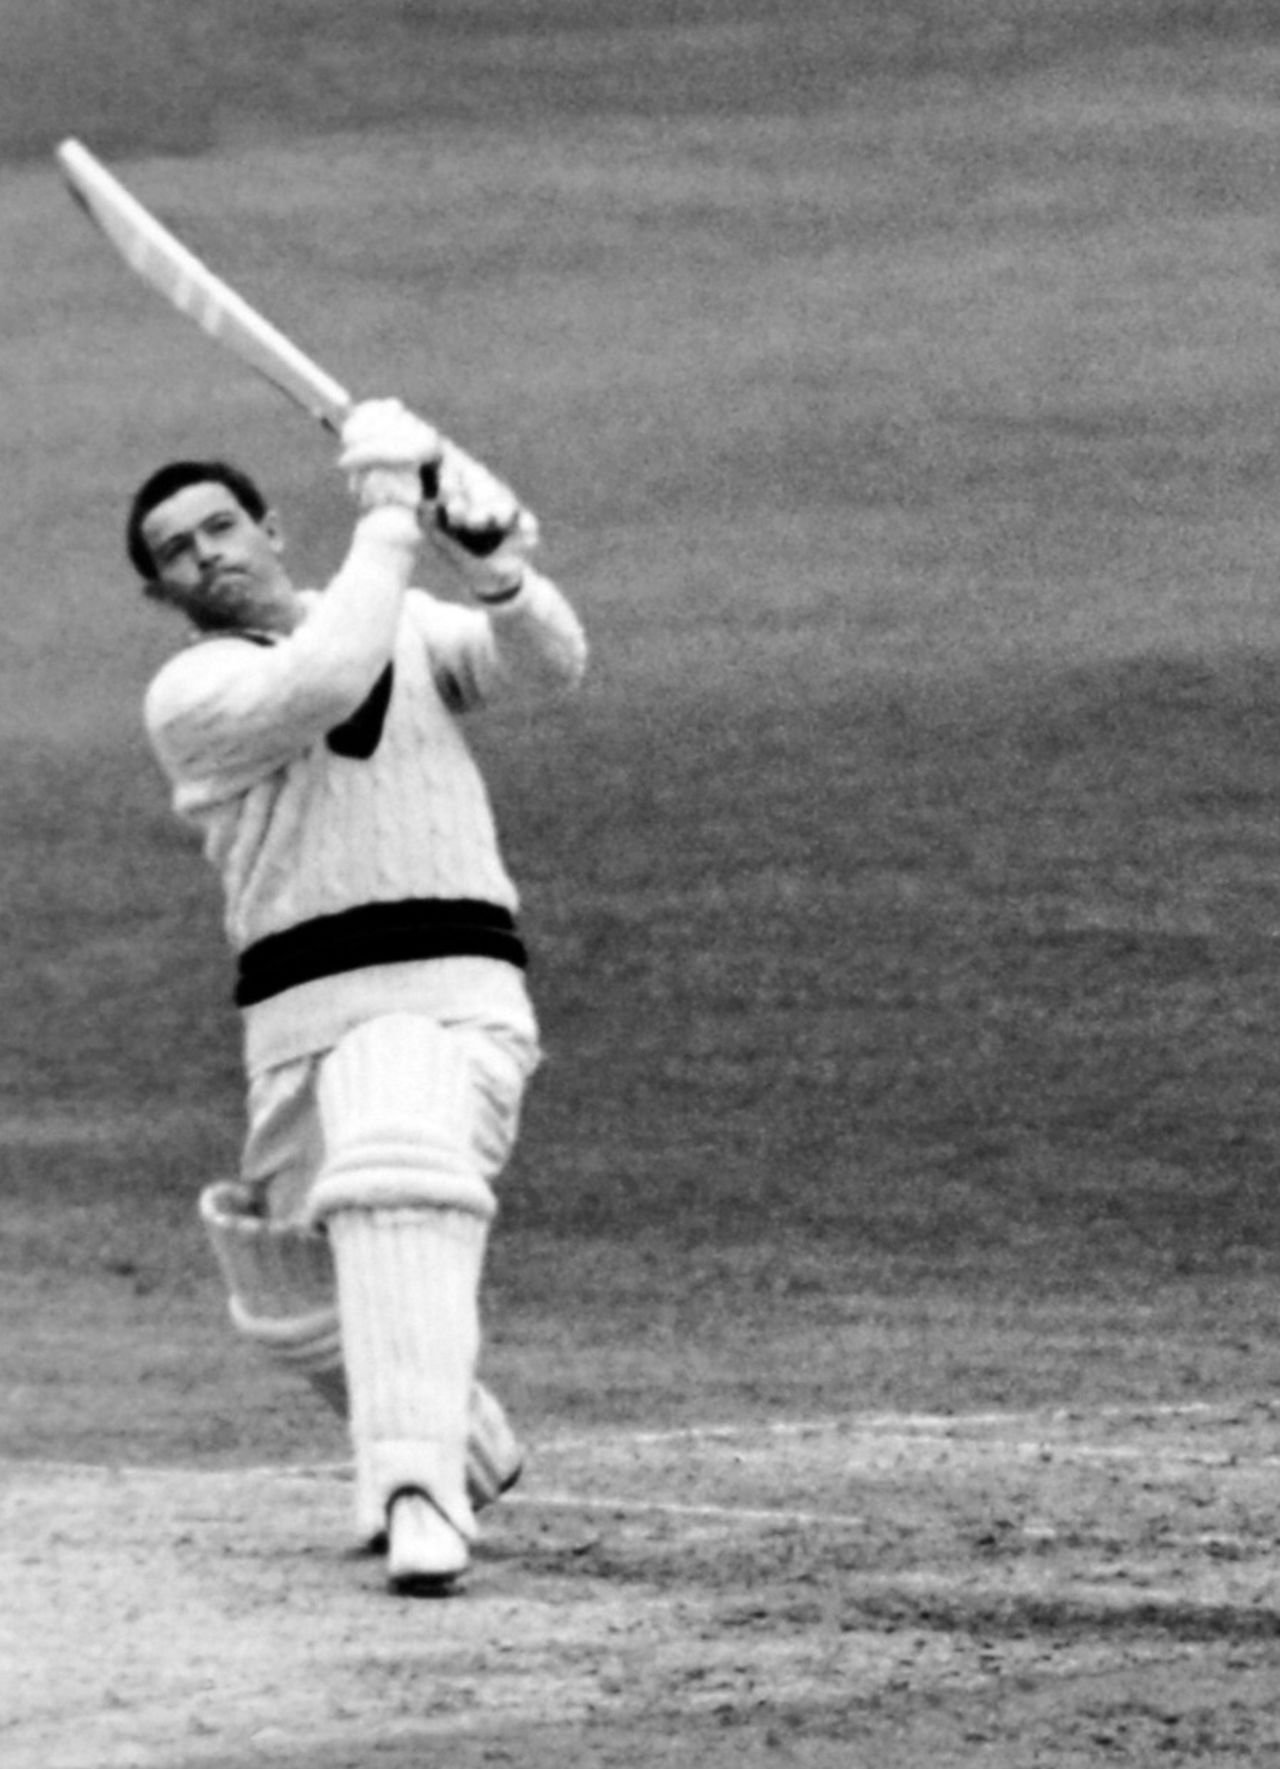 Harry Pilling goes over the leg side, Middlesex v Lancashire, Lord's, May 22, 1968